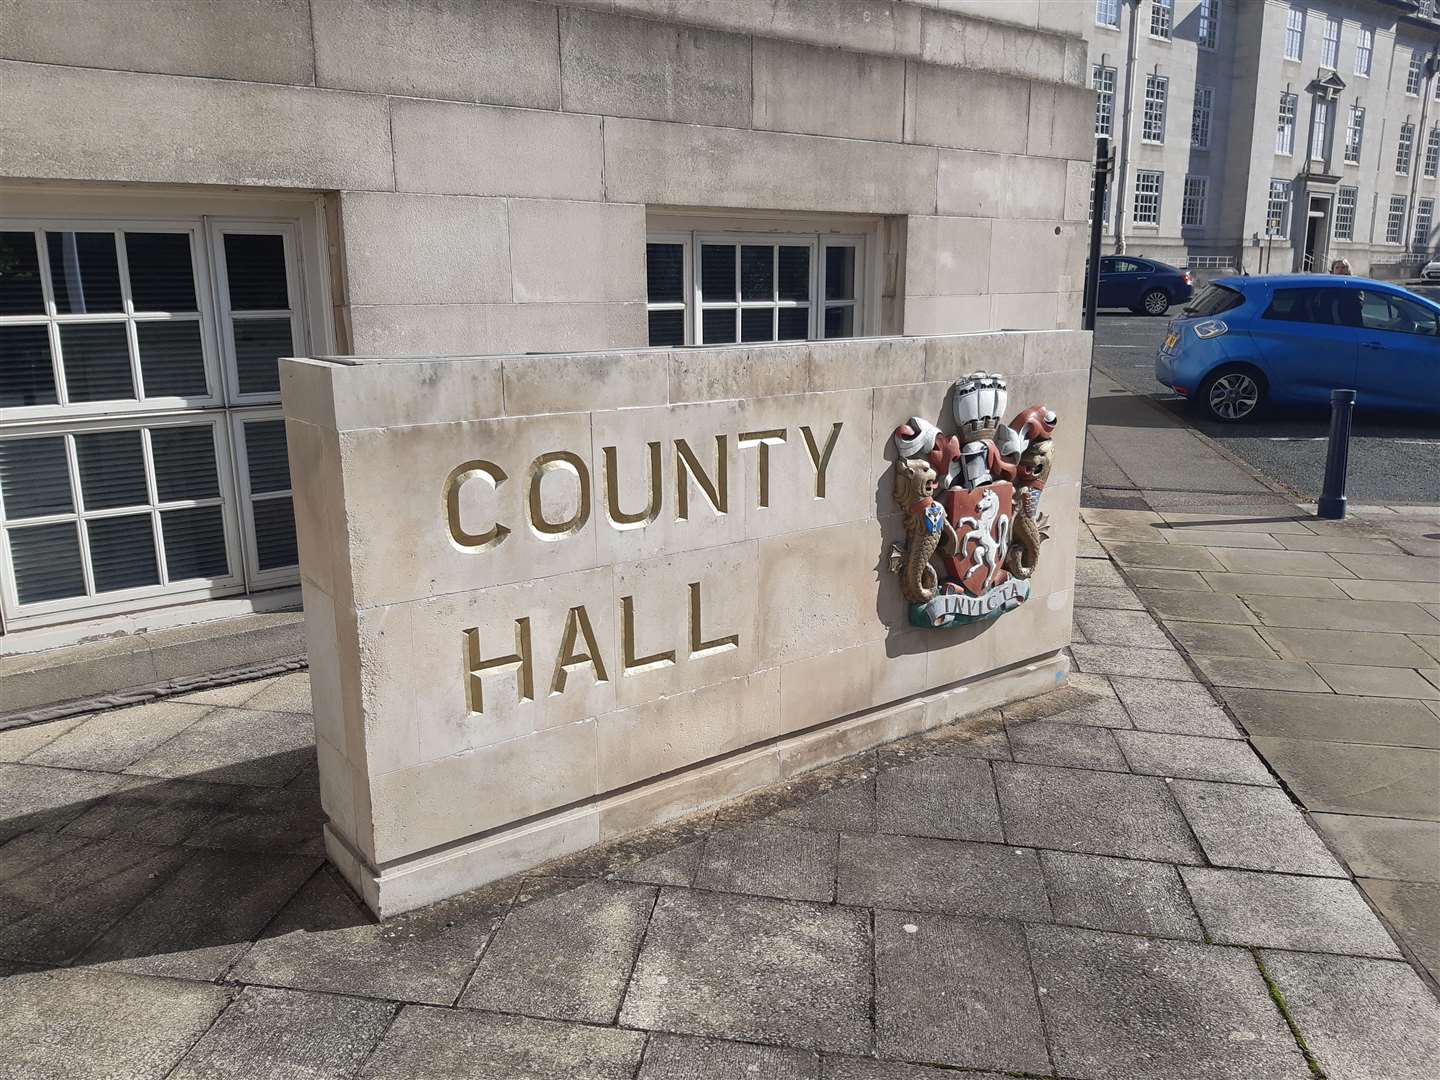 The inquest was held at County Hall in Maidstone, where assistant coroner Georgina Gibbs wrongly concluded that Brandon Licorish’s driving had been impaired by drugs